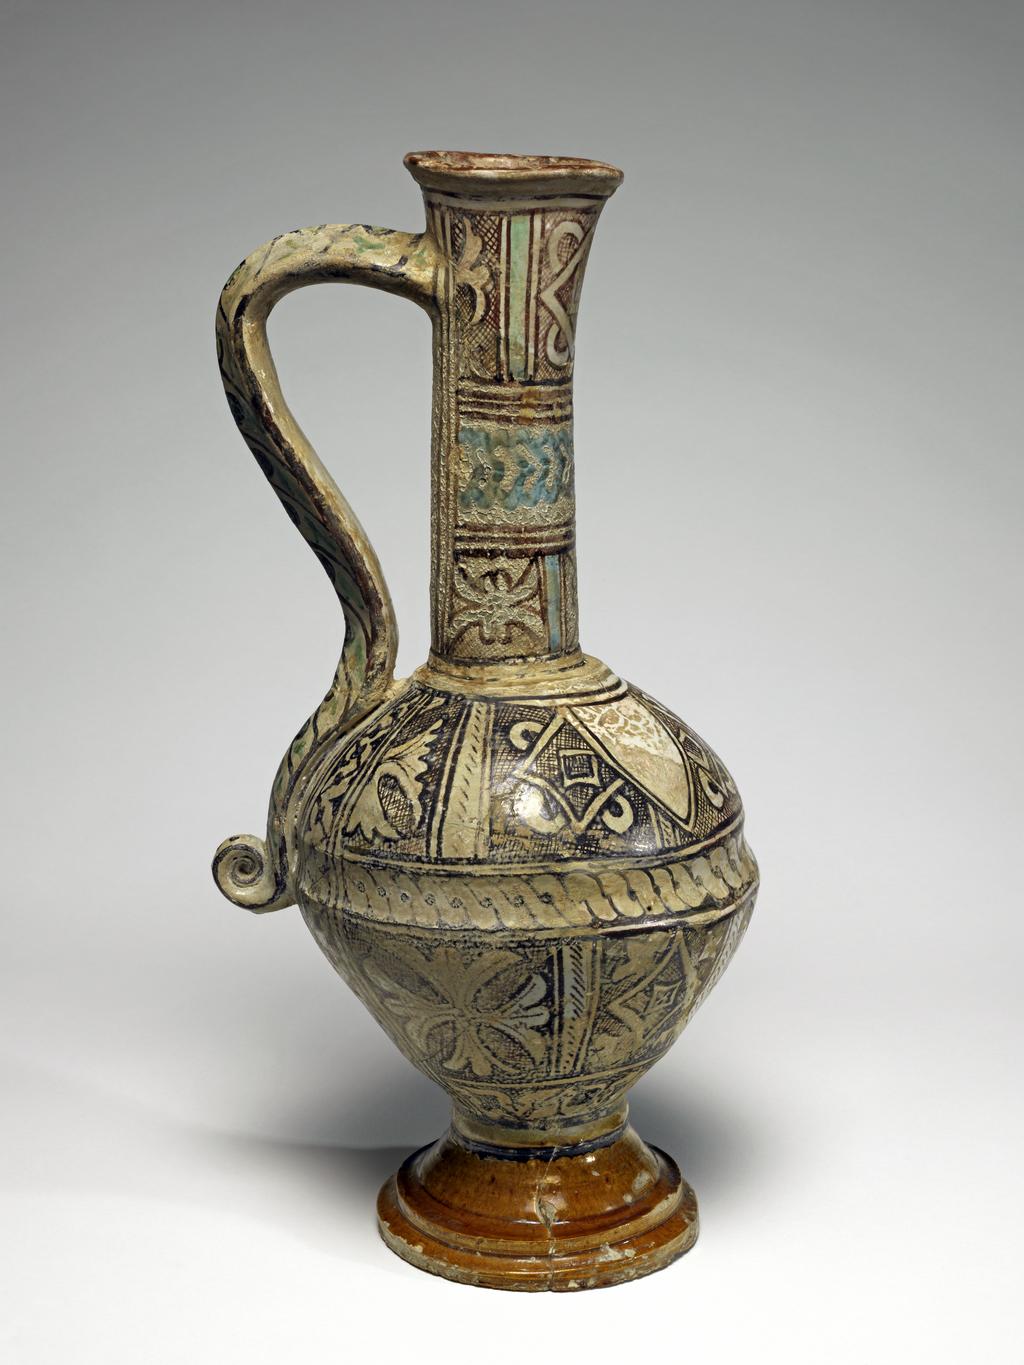 An image of Tin-glazed earthenware ewer. Maiolica arcaica. Late Medieval, painted in copper-green, turquoise-green and manganese with panels containing stylised foliage, rhomboids and knots, surrounded by cross-hatching and shields. Height 38.0cm, diameter, foot, 11.5cm, width, 19.0cm. Orvieto, Umbria. Circa 1275-1350.